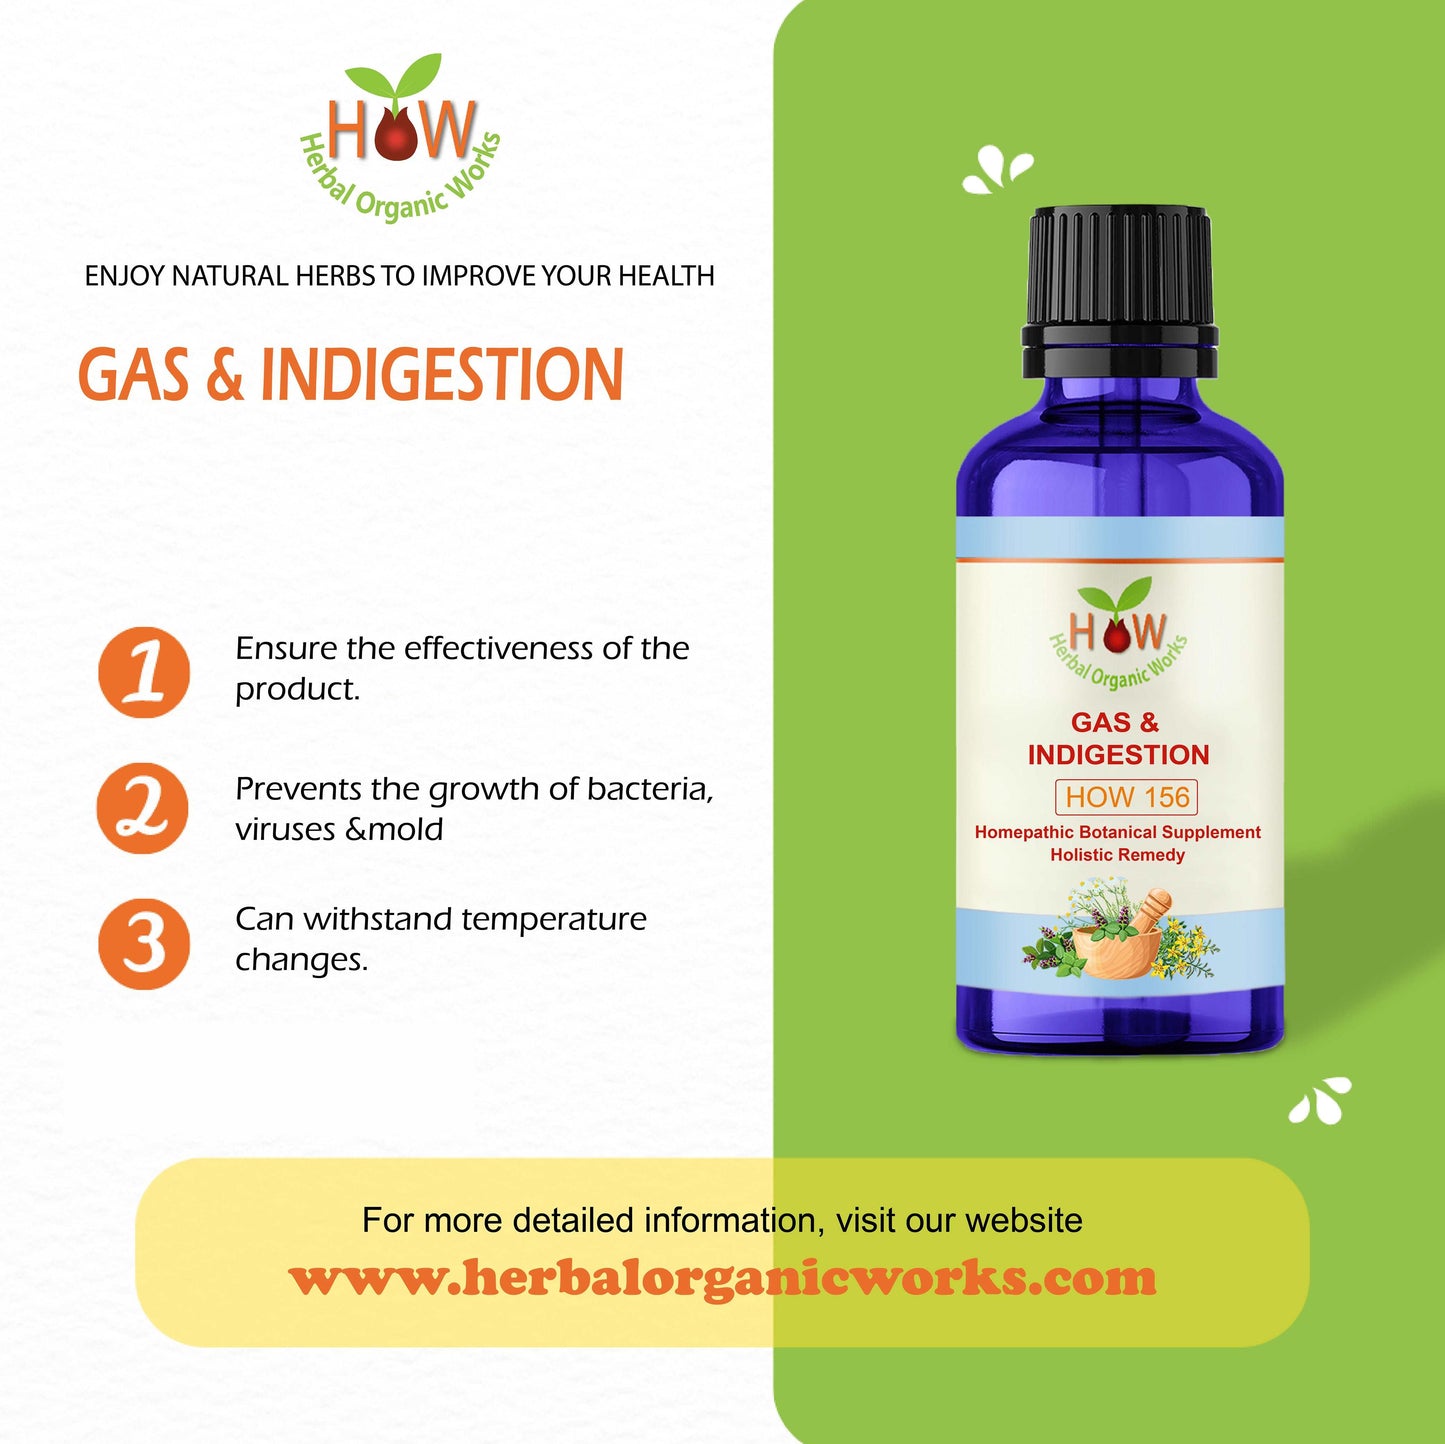 GAS & INDIGESTION NATURAL REMEDY (HOW156)